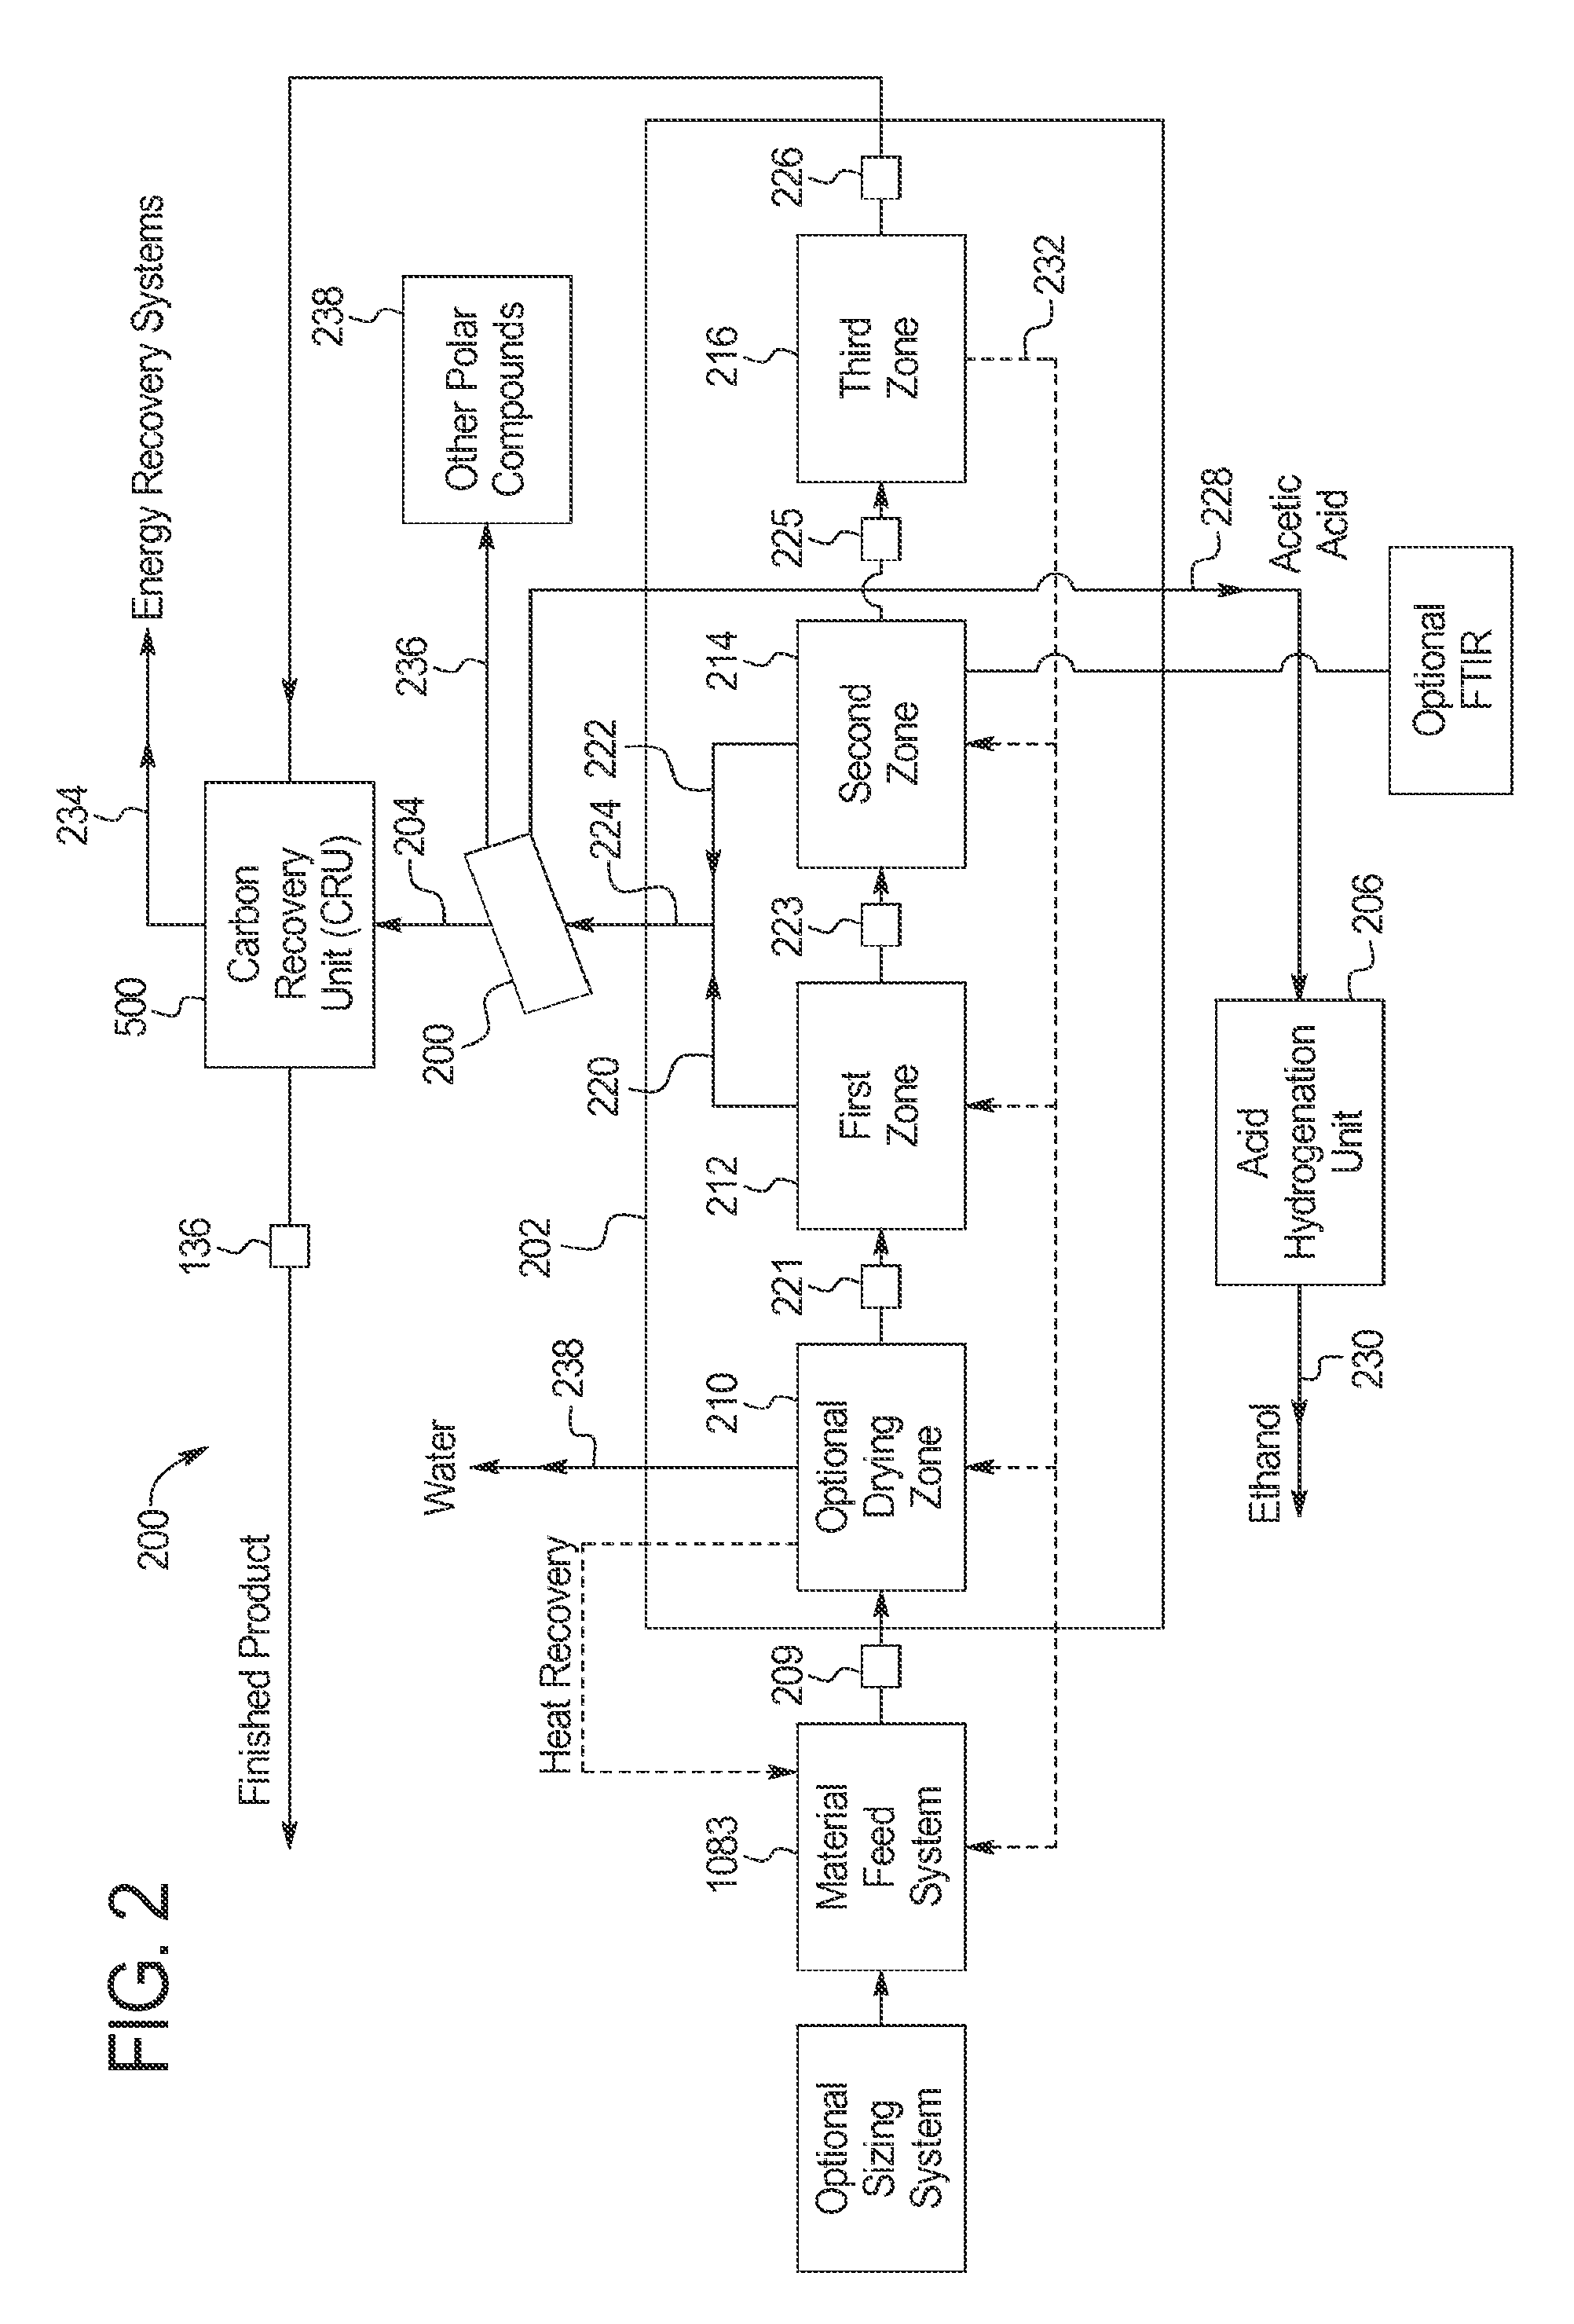 High-carbon biogenic reagents and uses thereof